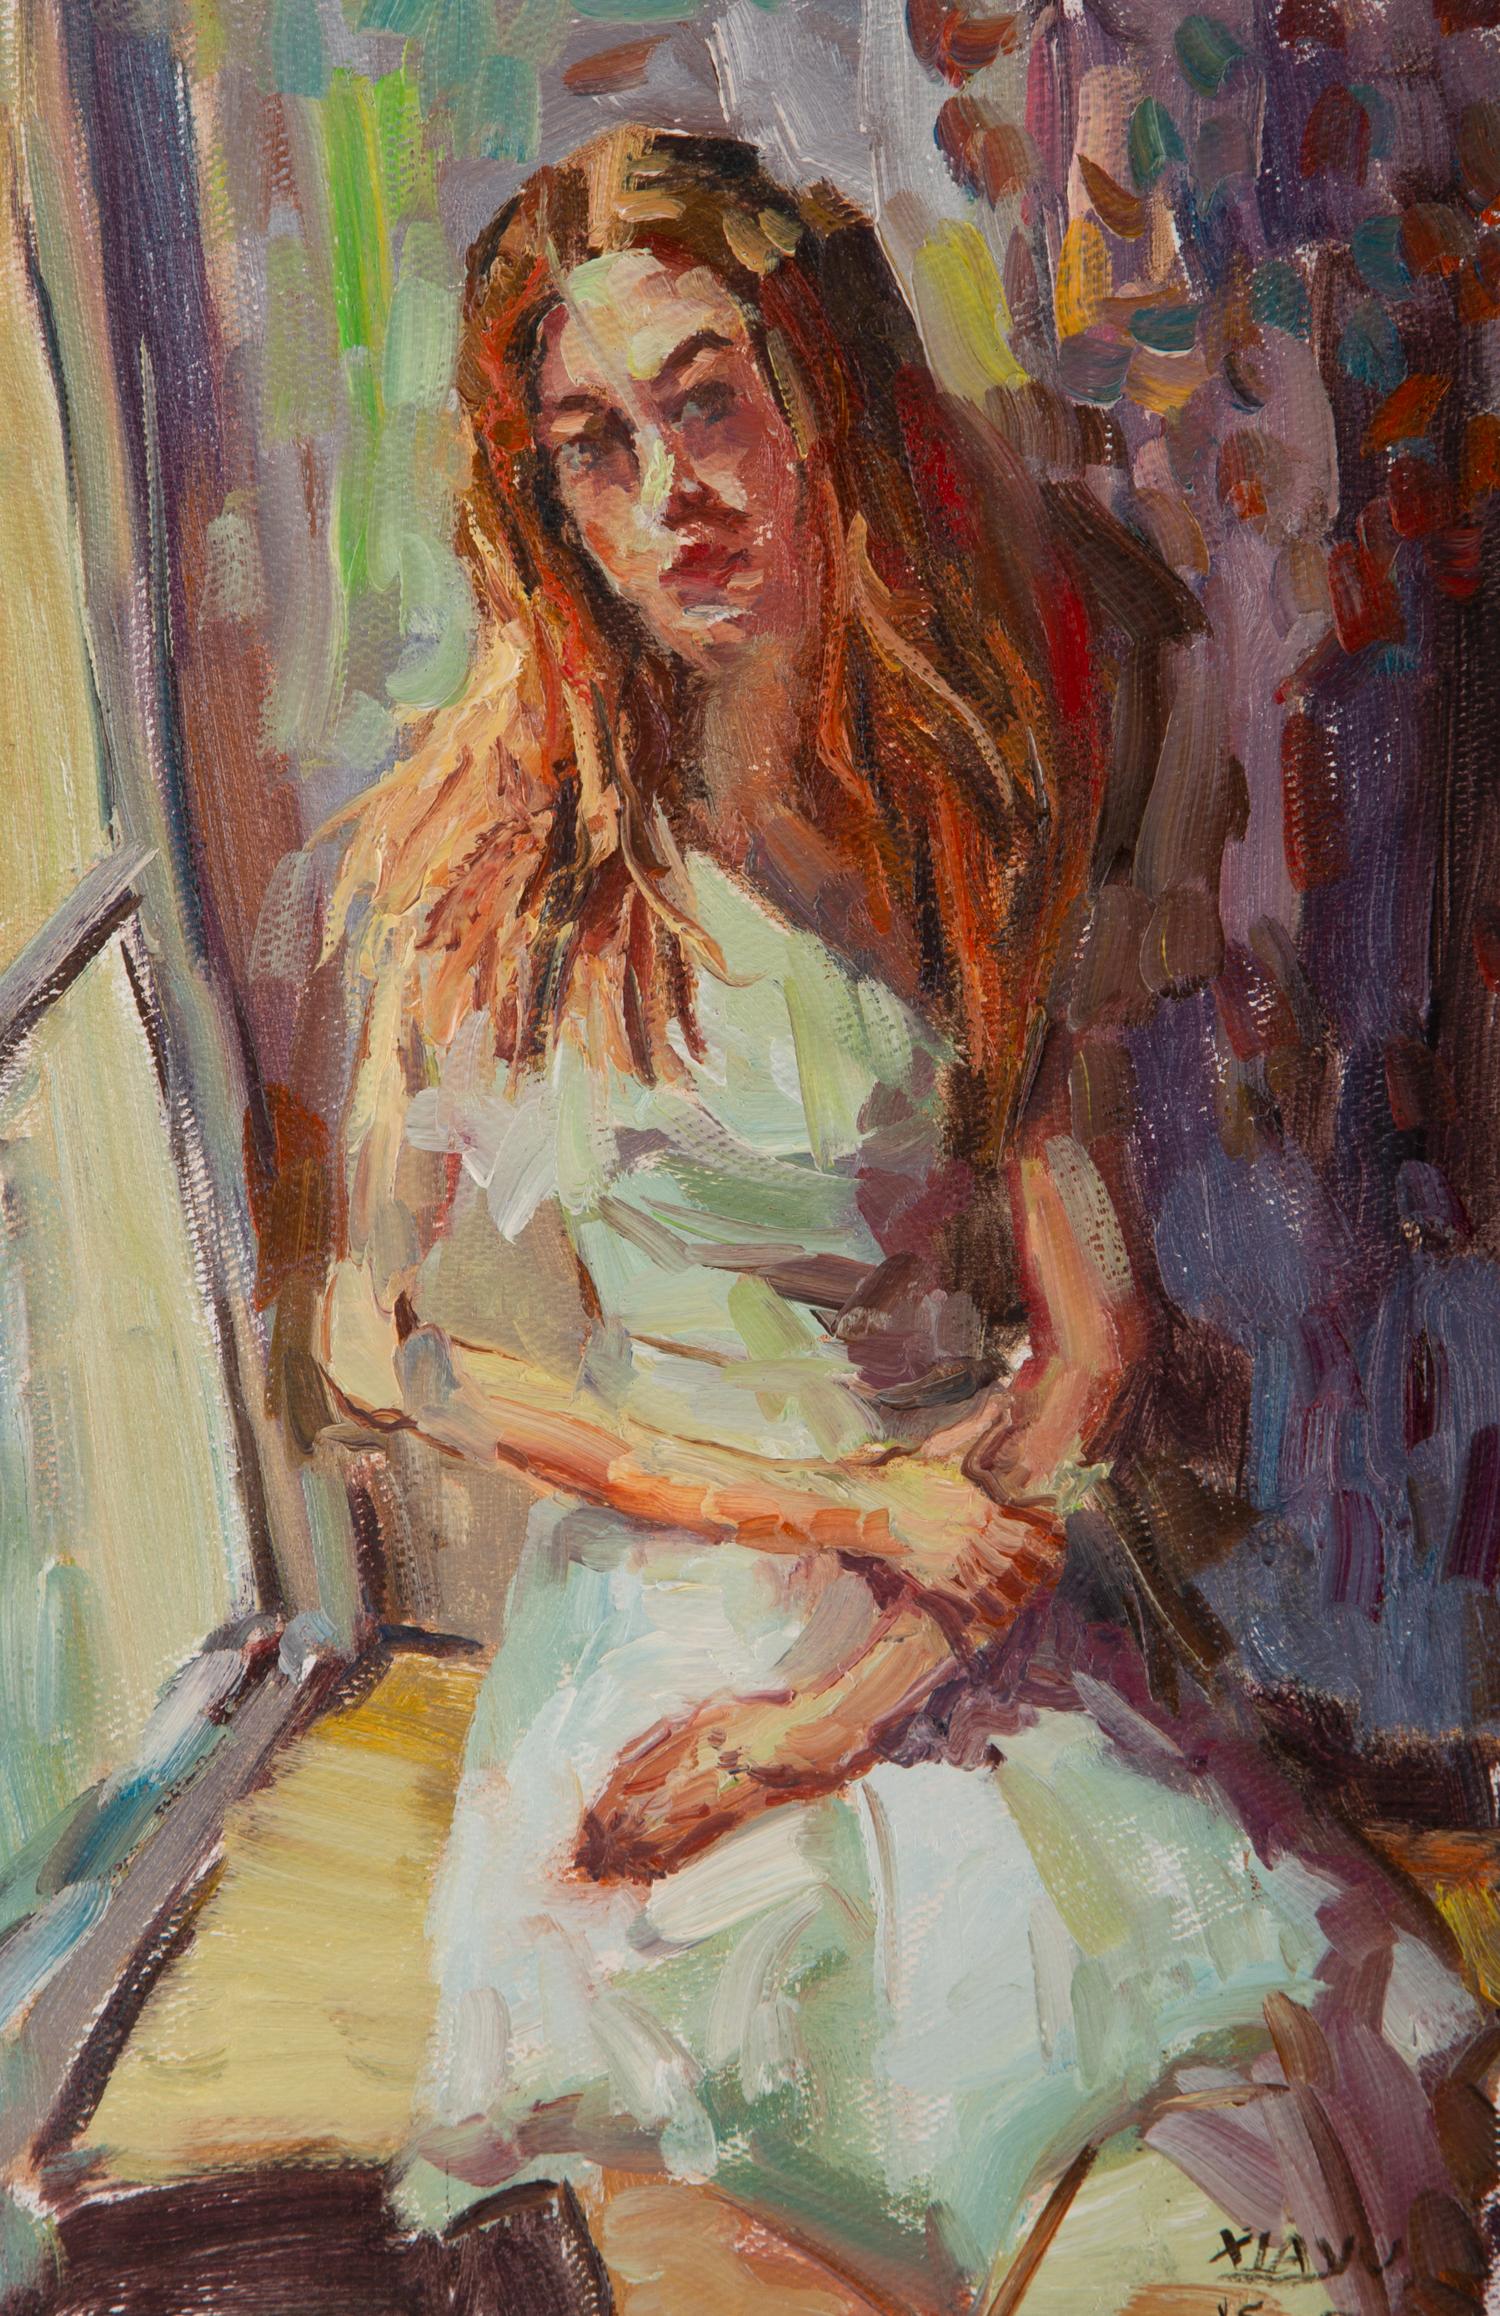 Title: Woman Next To Window
Medium: Oil on canvas
Size: 11.5 x 7.5 inches
Frame: Framing options available!
Condition: The painting appears to be in excellent condition.
Note: This painting is unstretched
Year: 2015
Artist: Yu Xia
Signature: